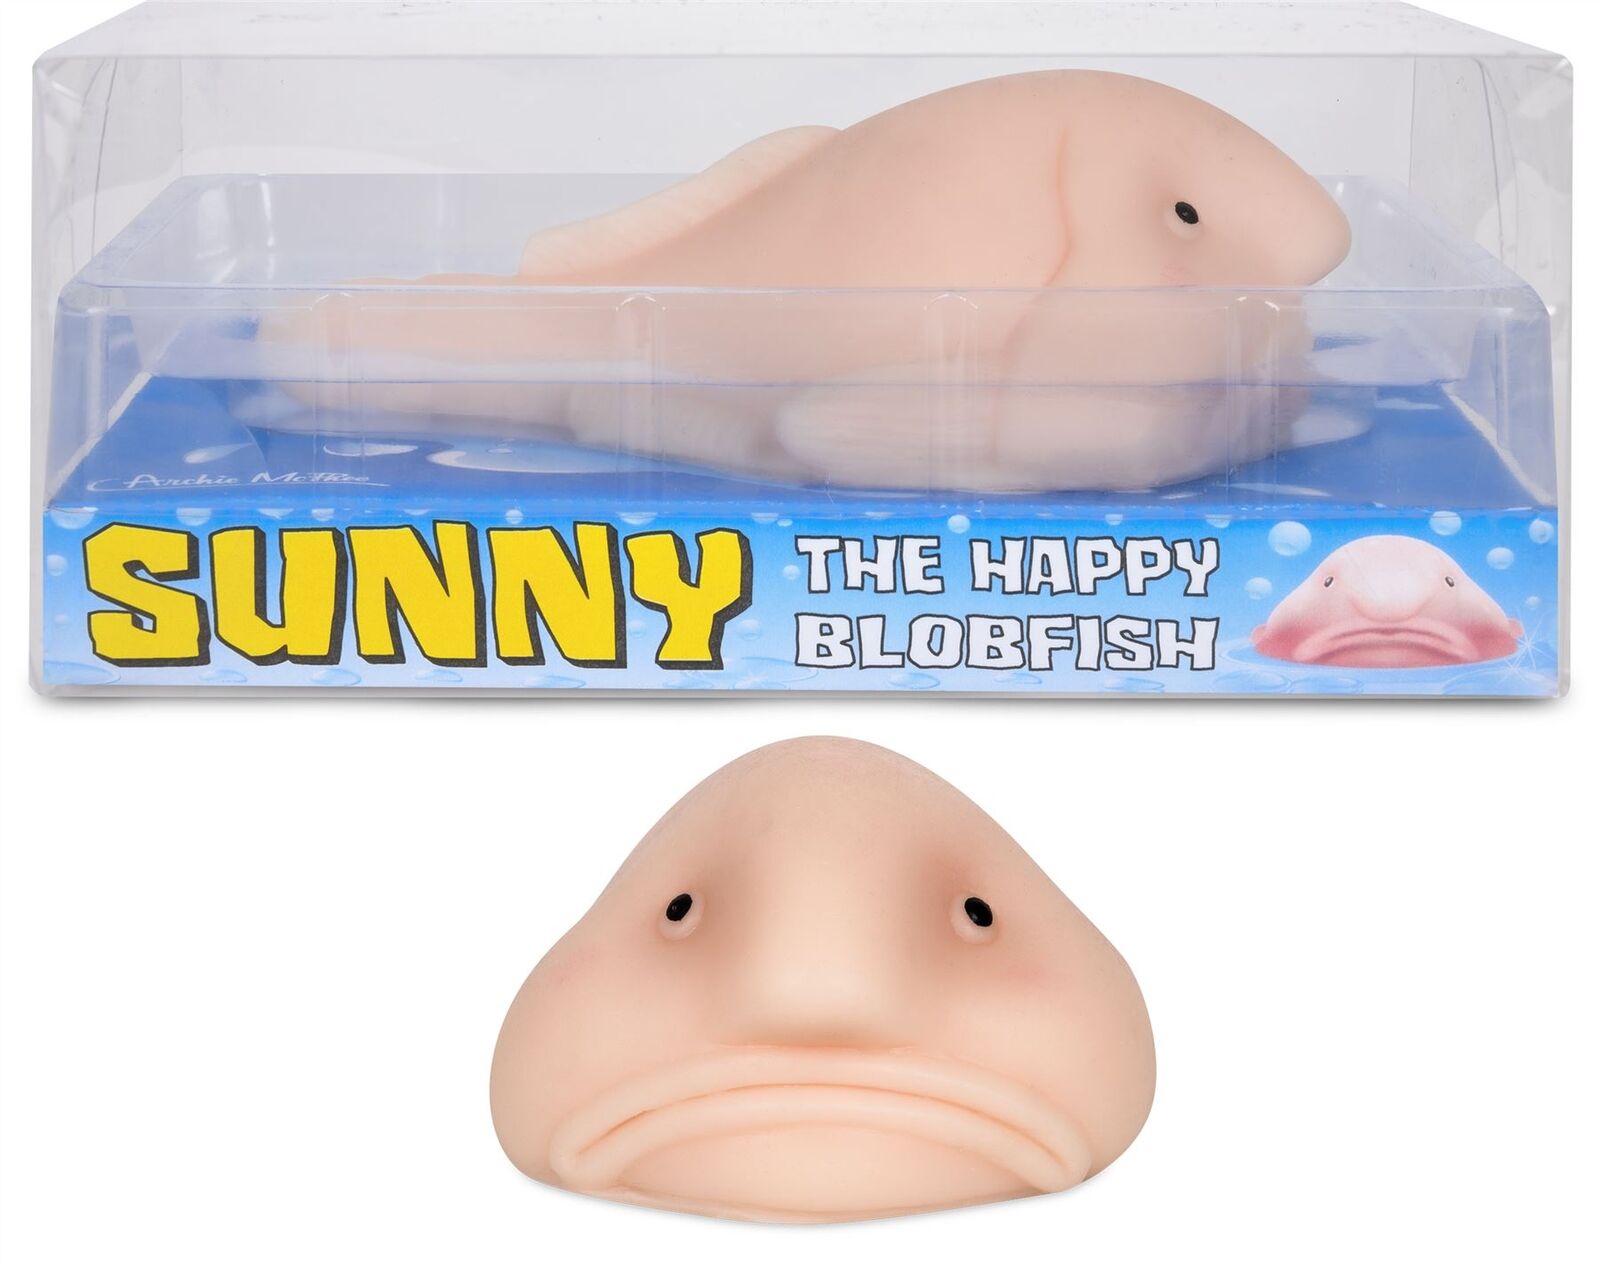 Sunny The Happy Blobfish by Accoutrements Novelty Toy Ugliest Ugly Fish 